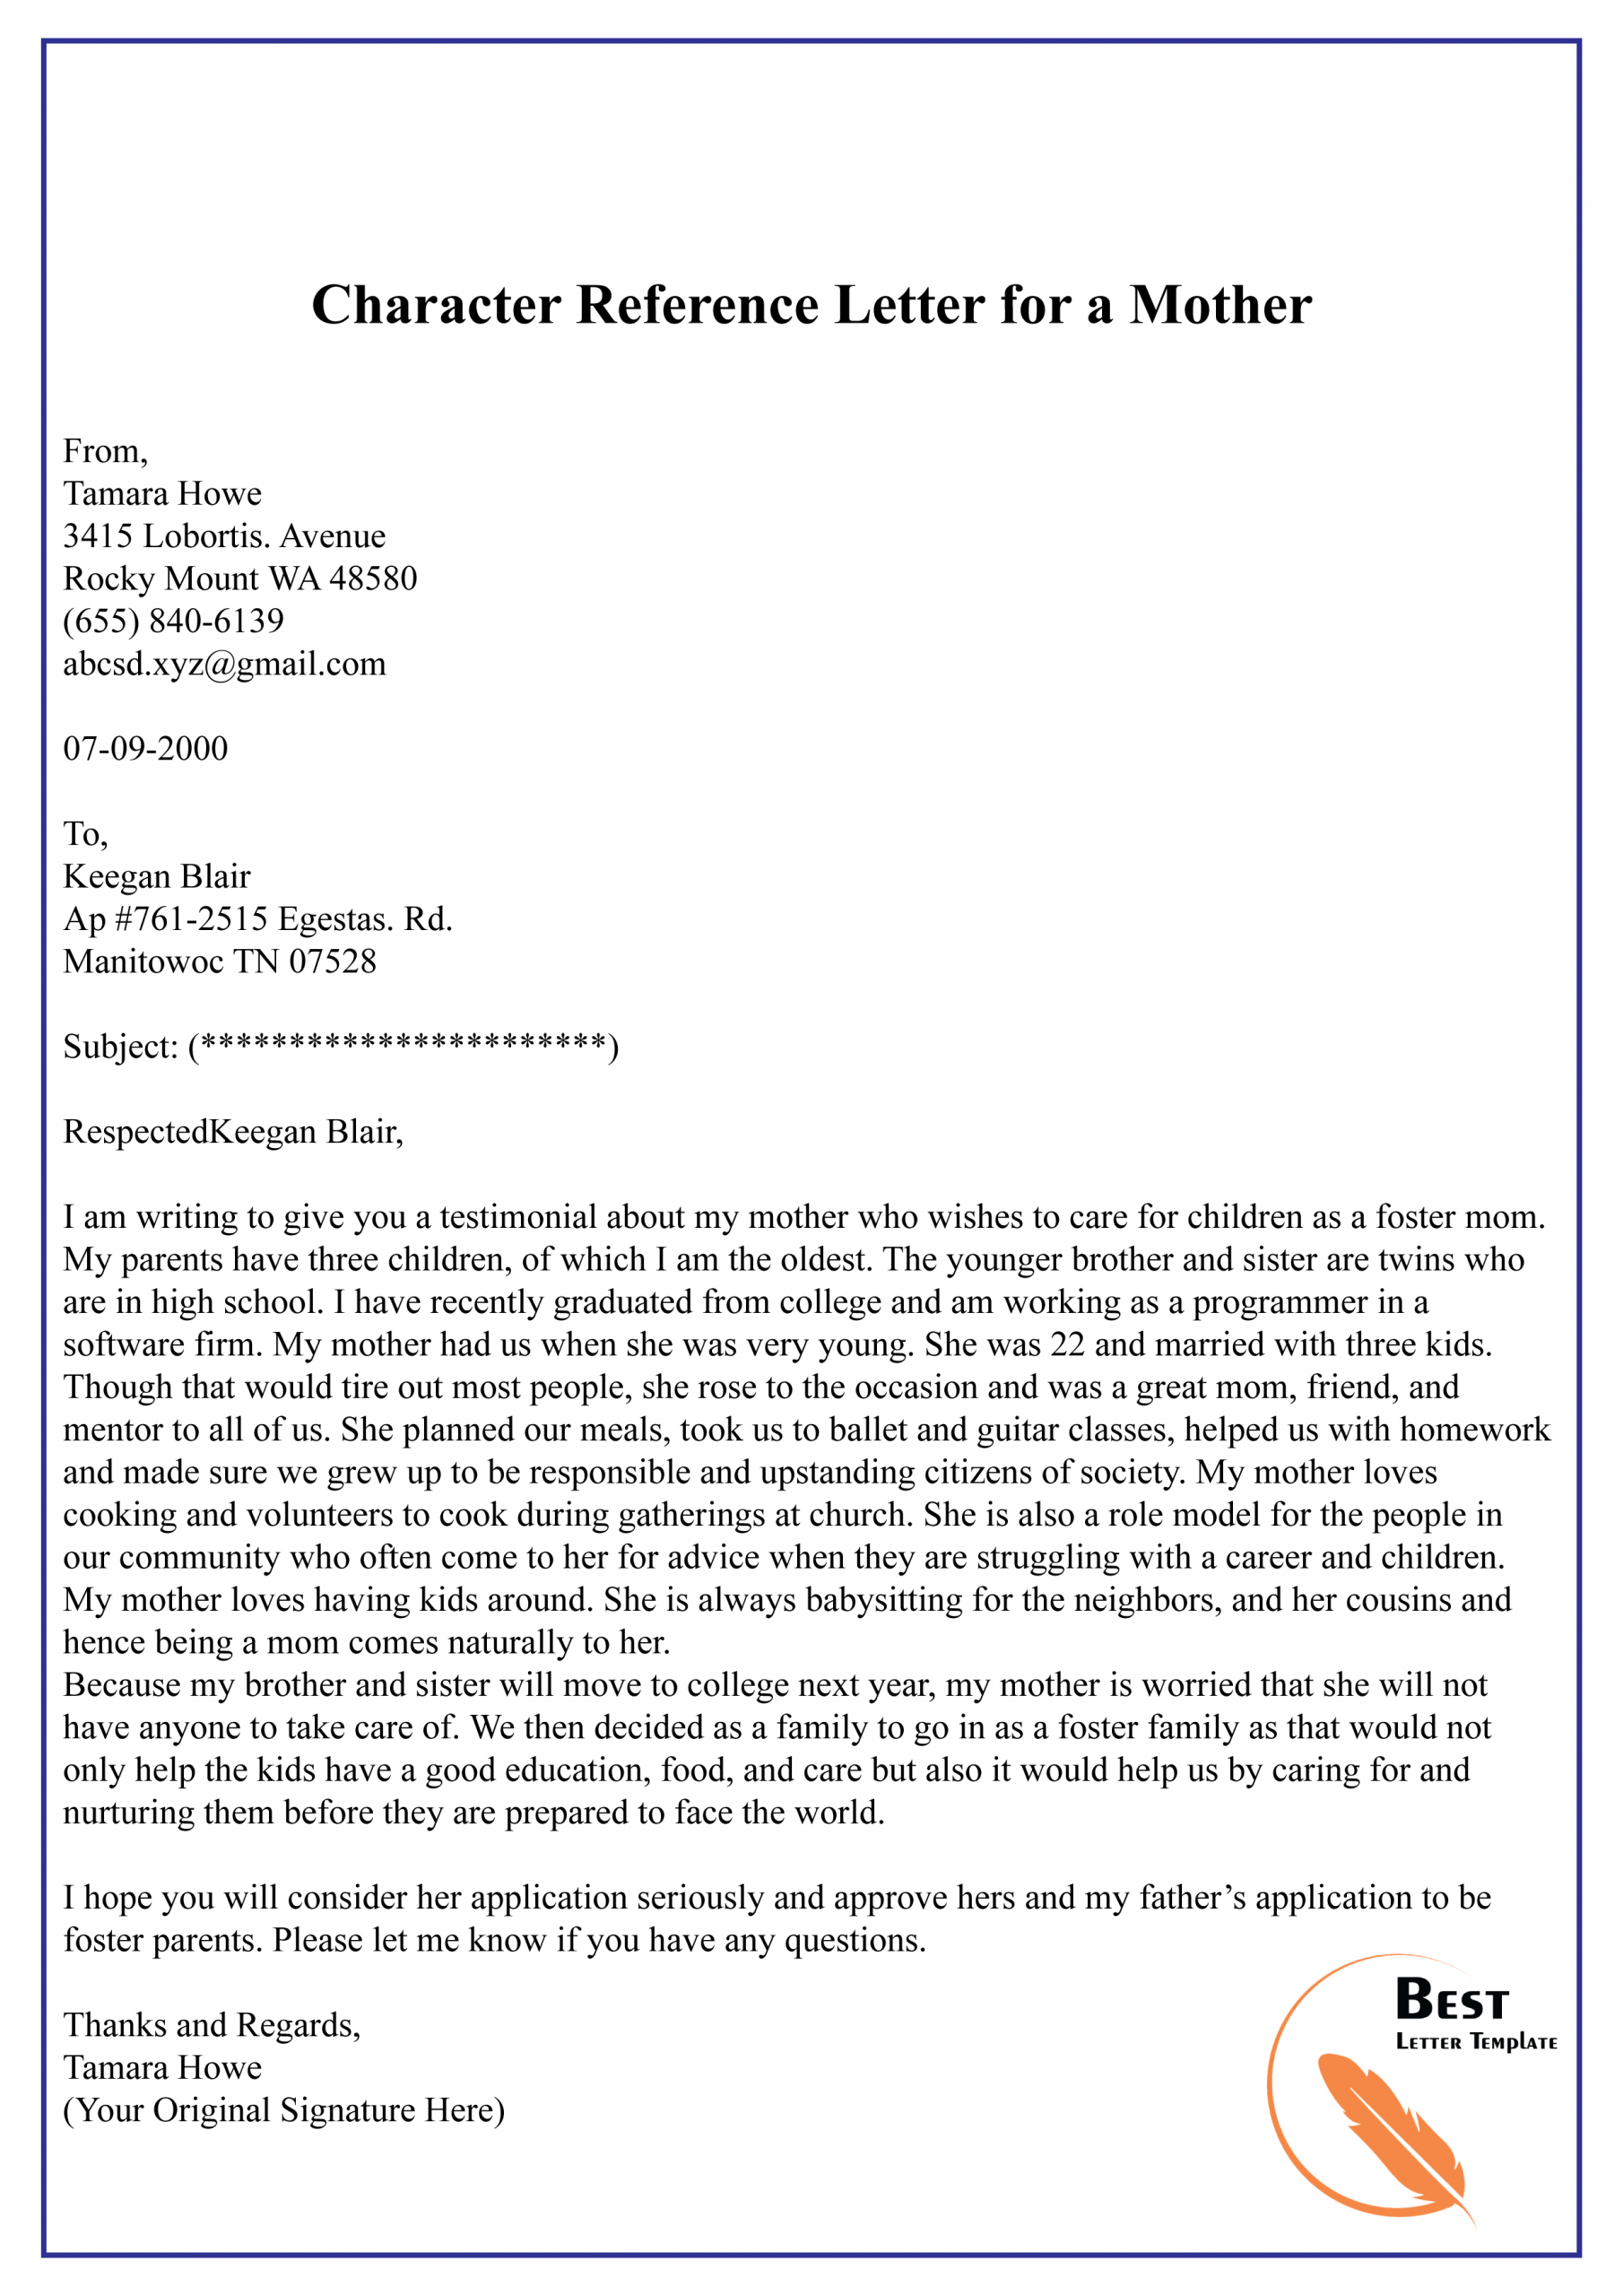 Character Reference Letter For A Mother 01 Best Letter in size 2480 X 3508